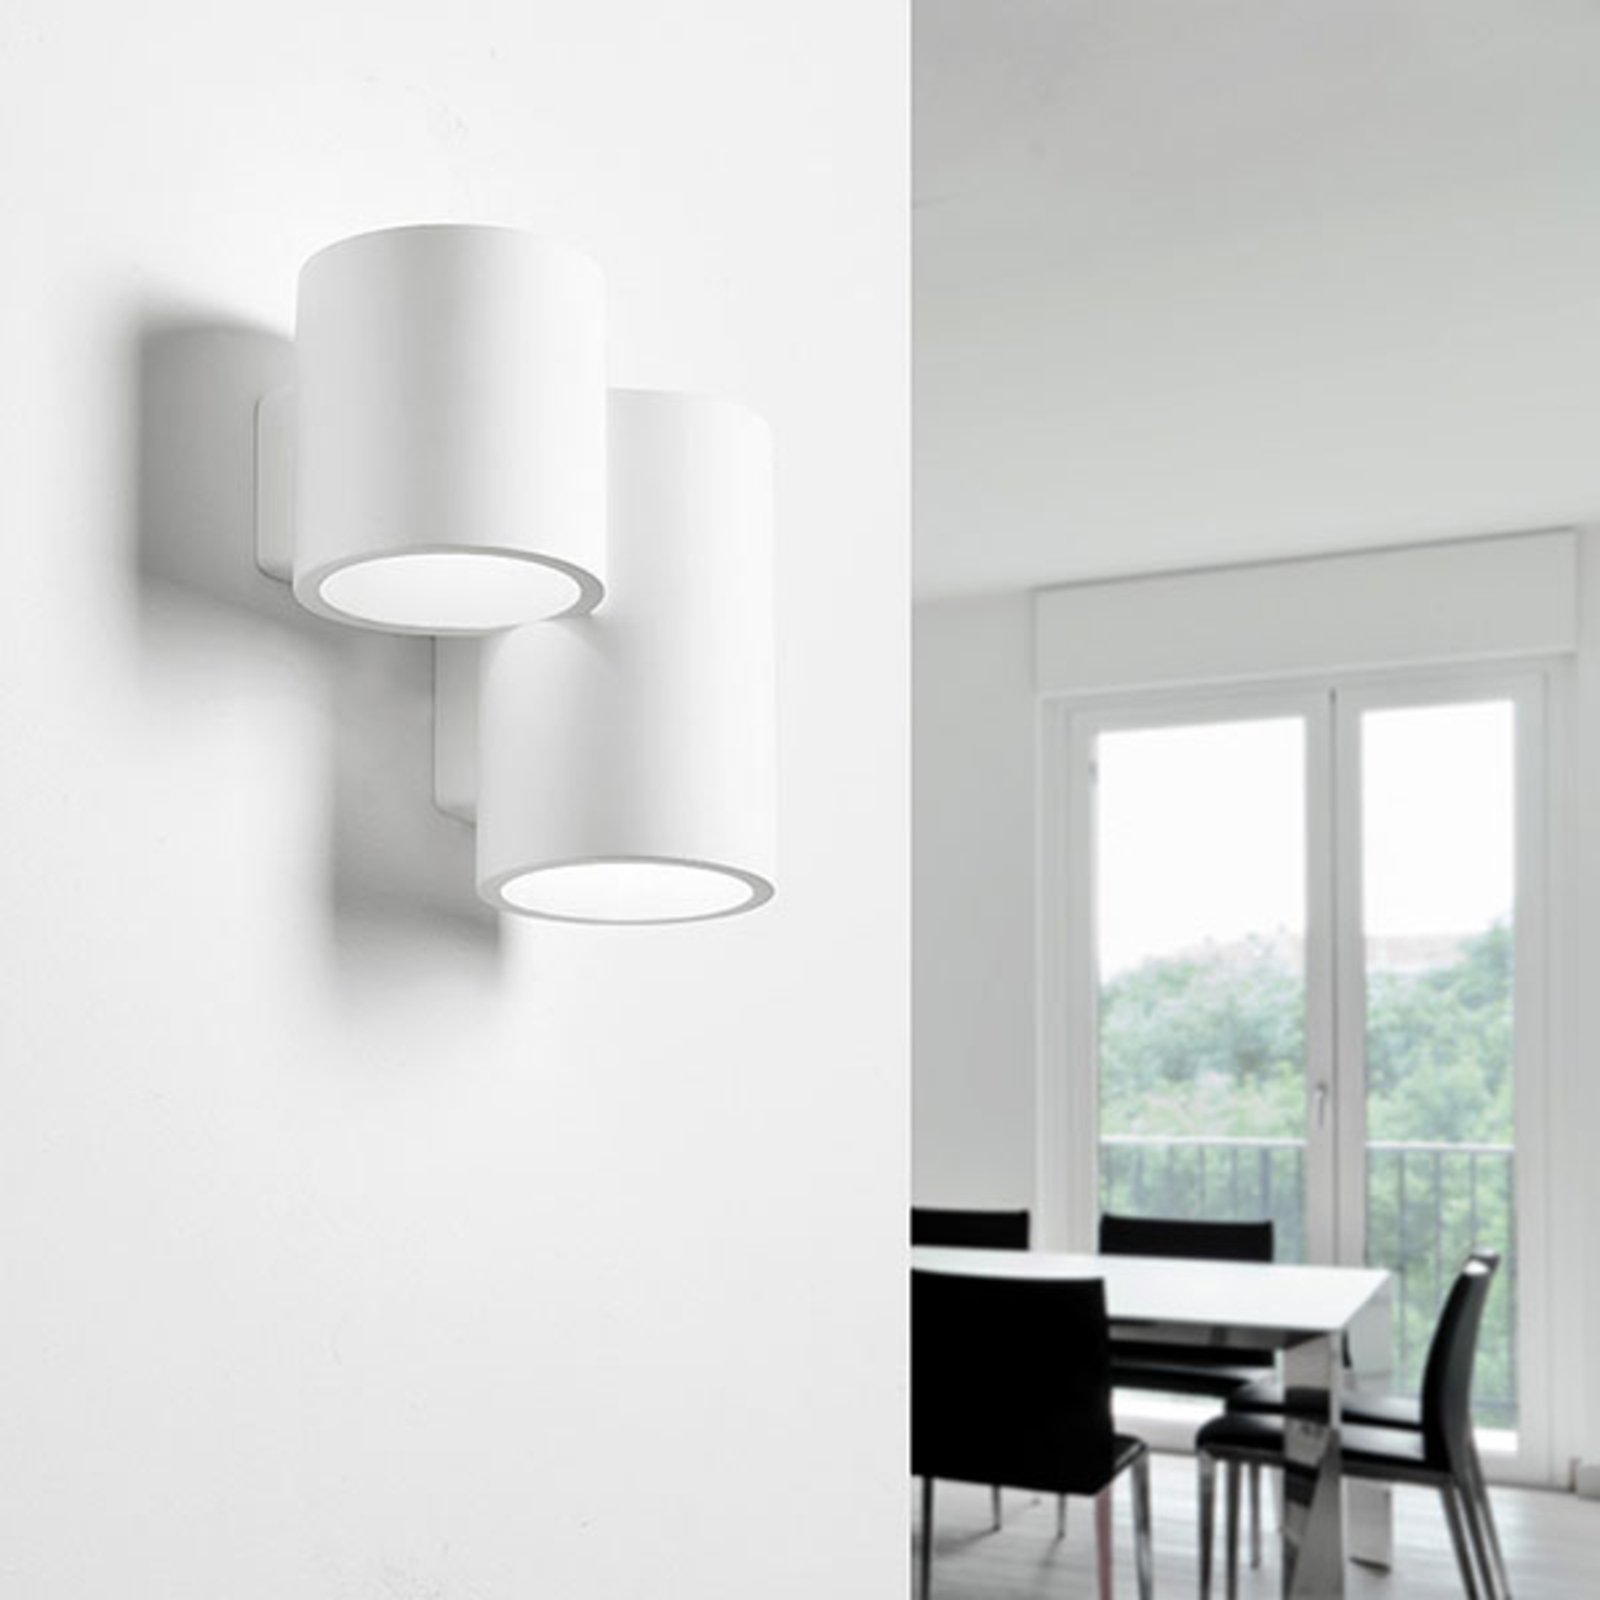 Arta wall light with two cylinders